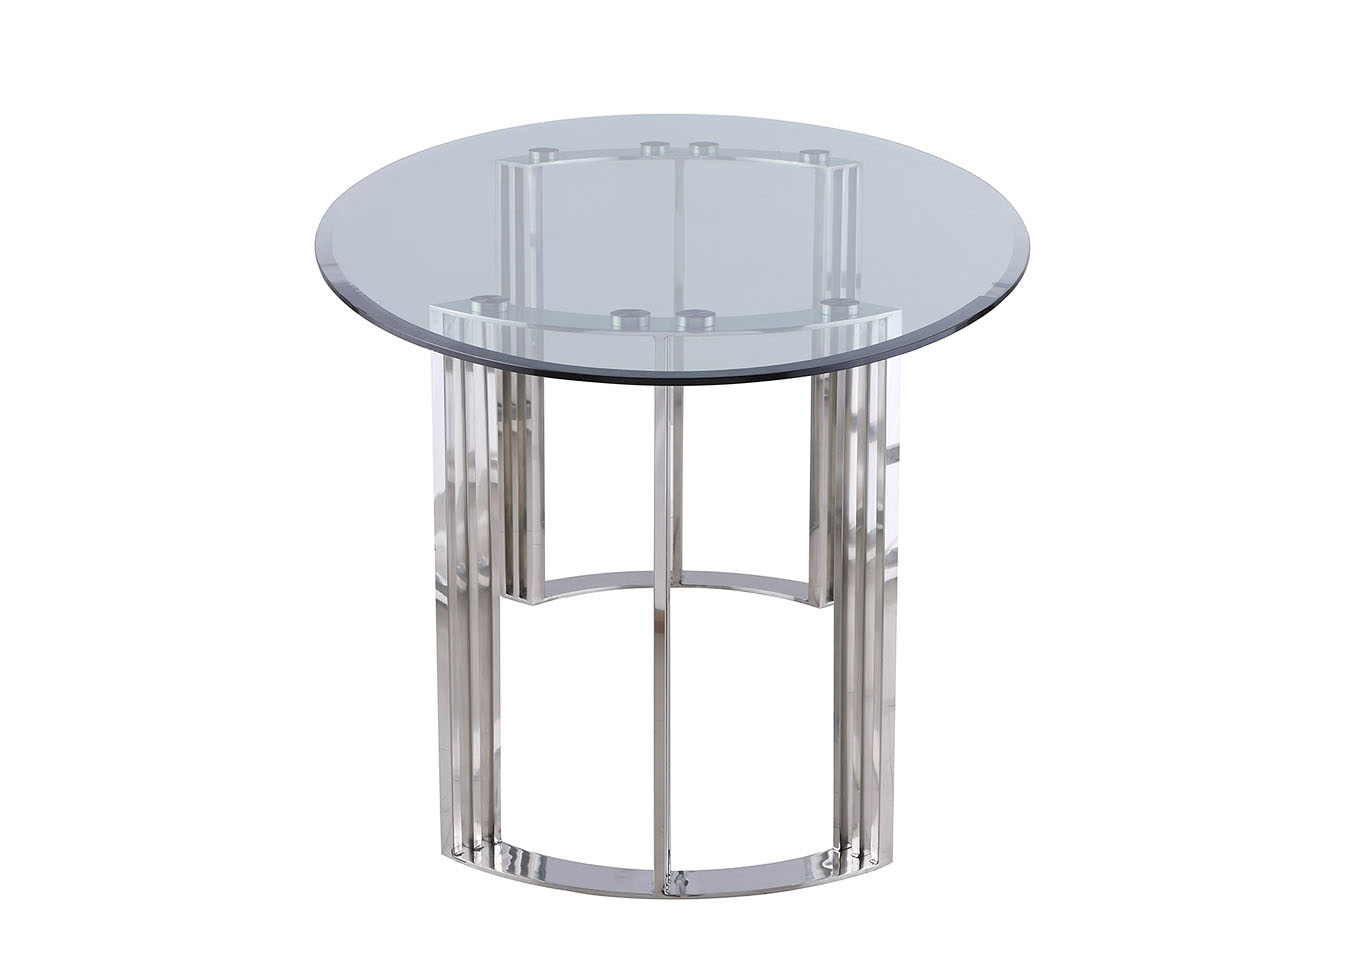 Maiden Clear Oval Glass Top Dining Table,Chintaly Imports